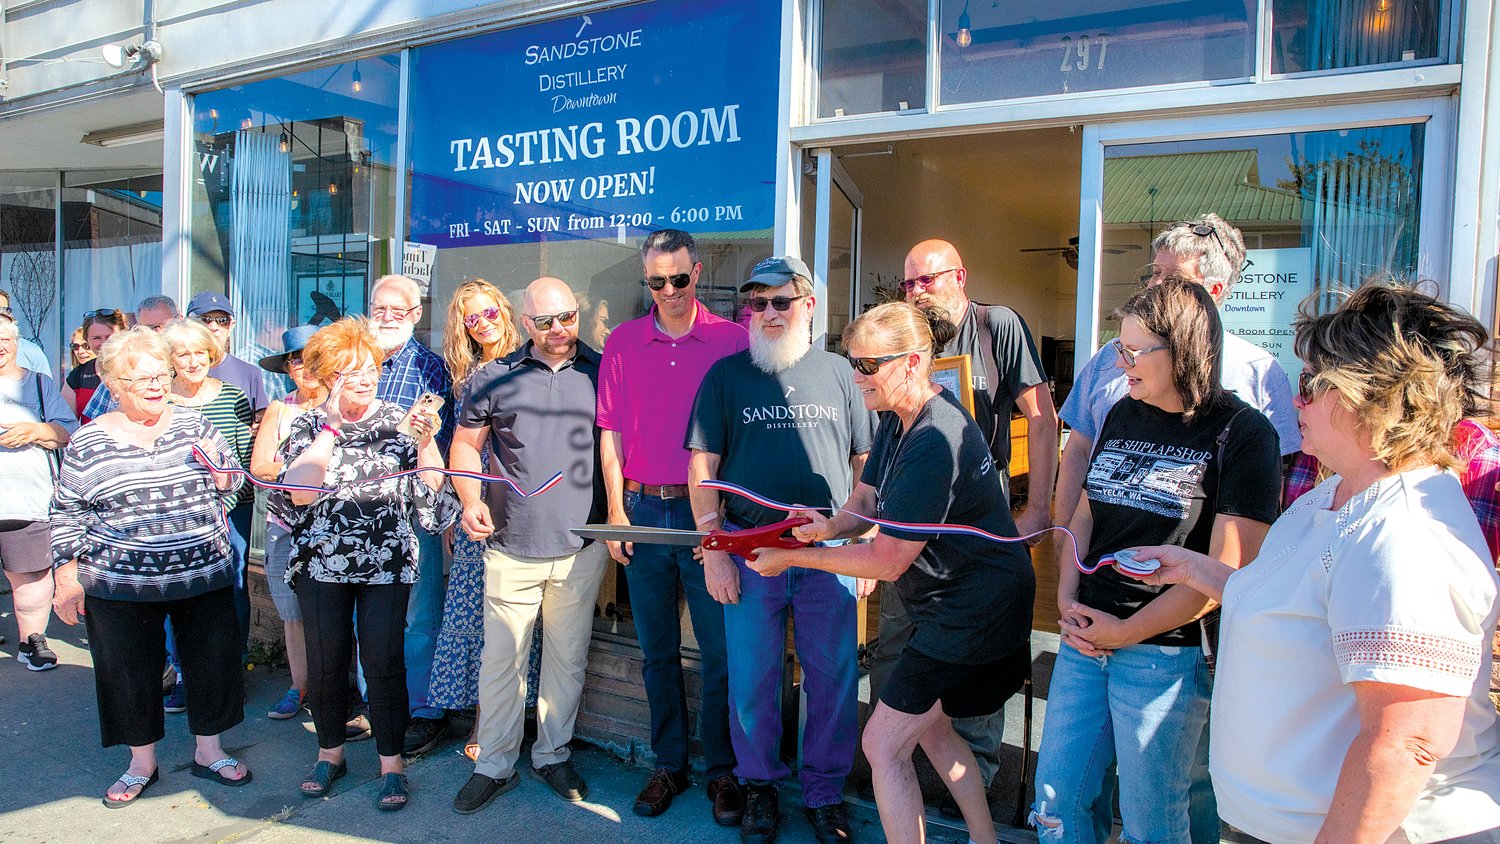 Jenni Bourdon smiles as she cuts a ribbon during a ceremony for the opening of the Sandstone Distillery Tasting Room in downtown Tenino on Thursday. The new tasting room is located at 297 Sussex Ave. W. in Tenino. The room will be open Saturday and Sunday for Oregon Trail Days. Learn more by following the Sandstone Distillery on Facebook.